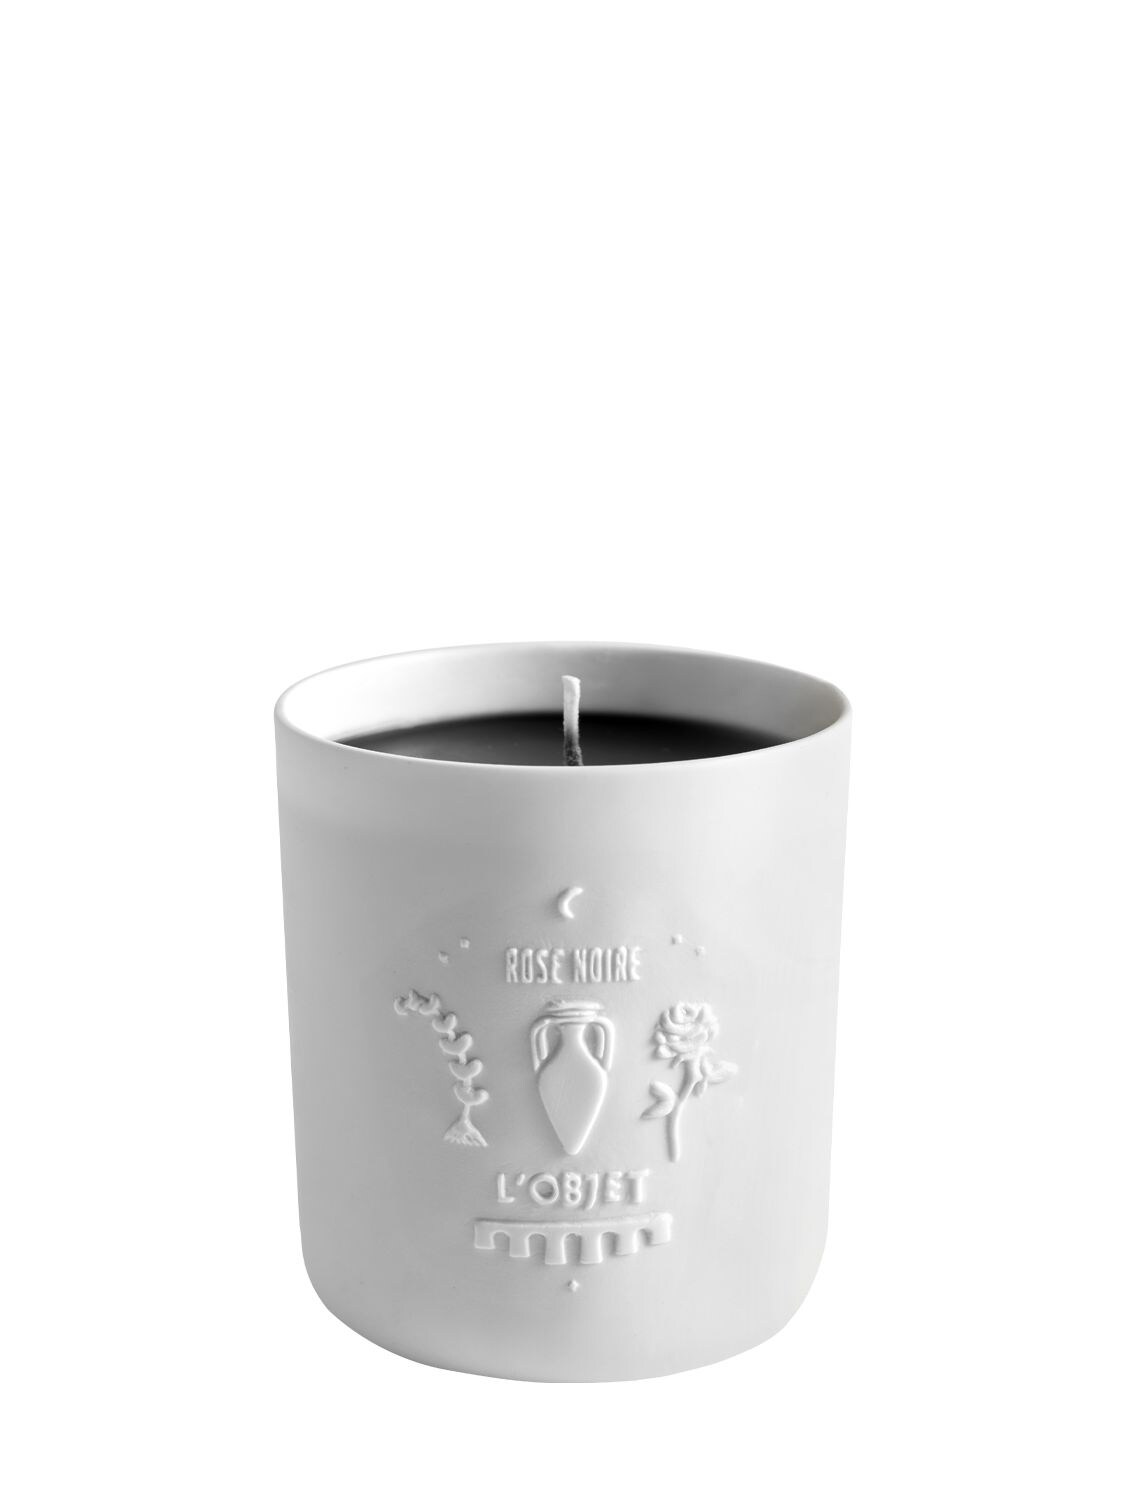 L'objet Rose Noire Apothecary Scented Candle In White